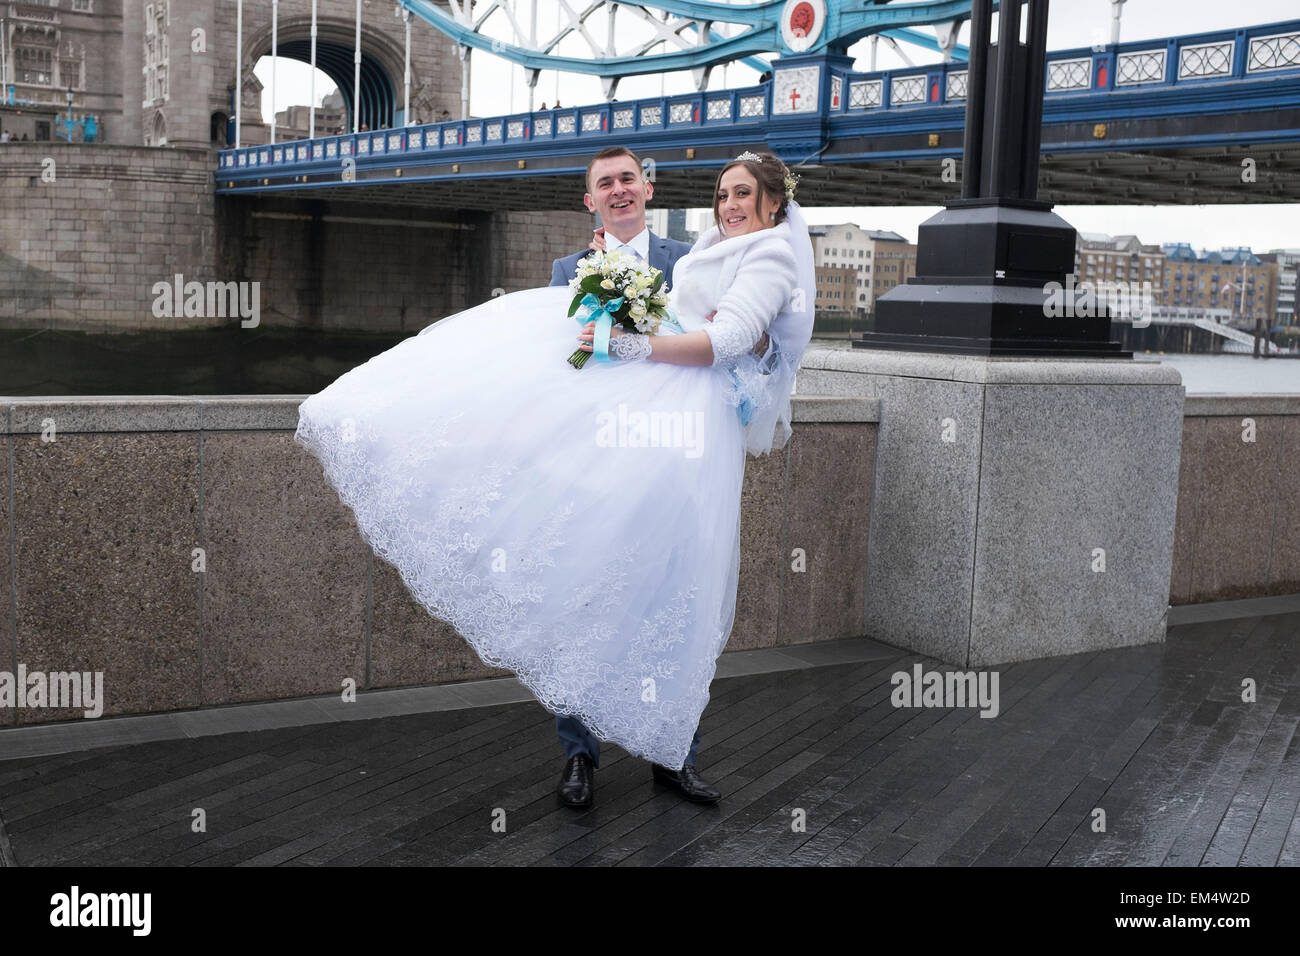 Russian bride and groom having their wedding photos taken at Tower Bridge, London, UK. It is a common site to see Russian and other nationalities having pre-wedding photographs taken at famous sites around the capital. Stock Photo